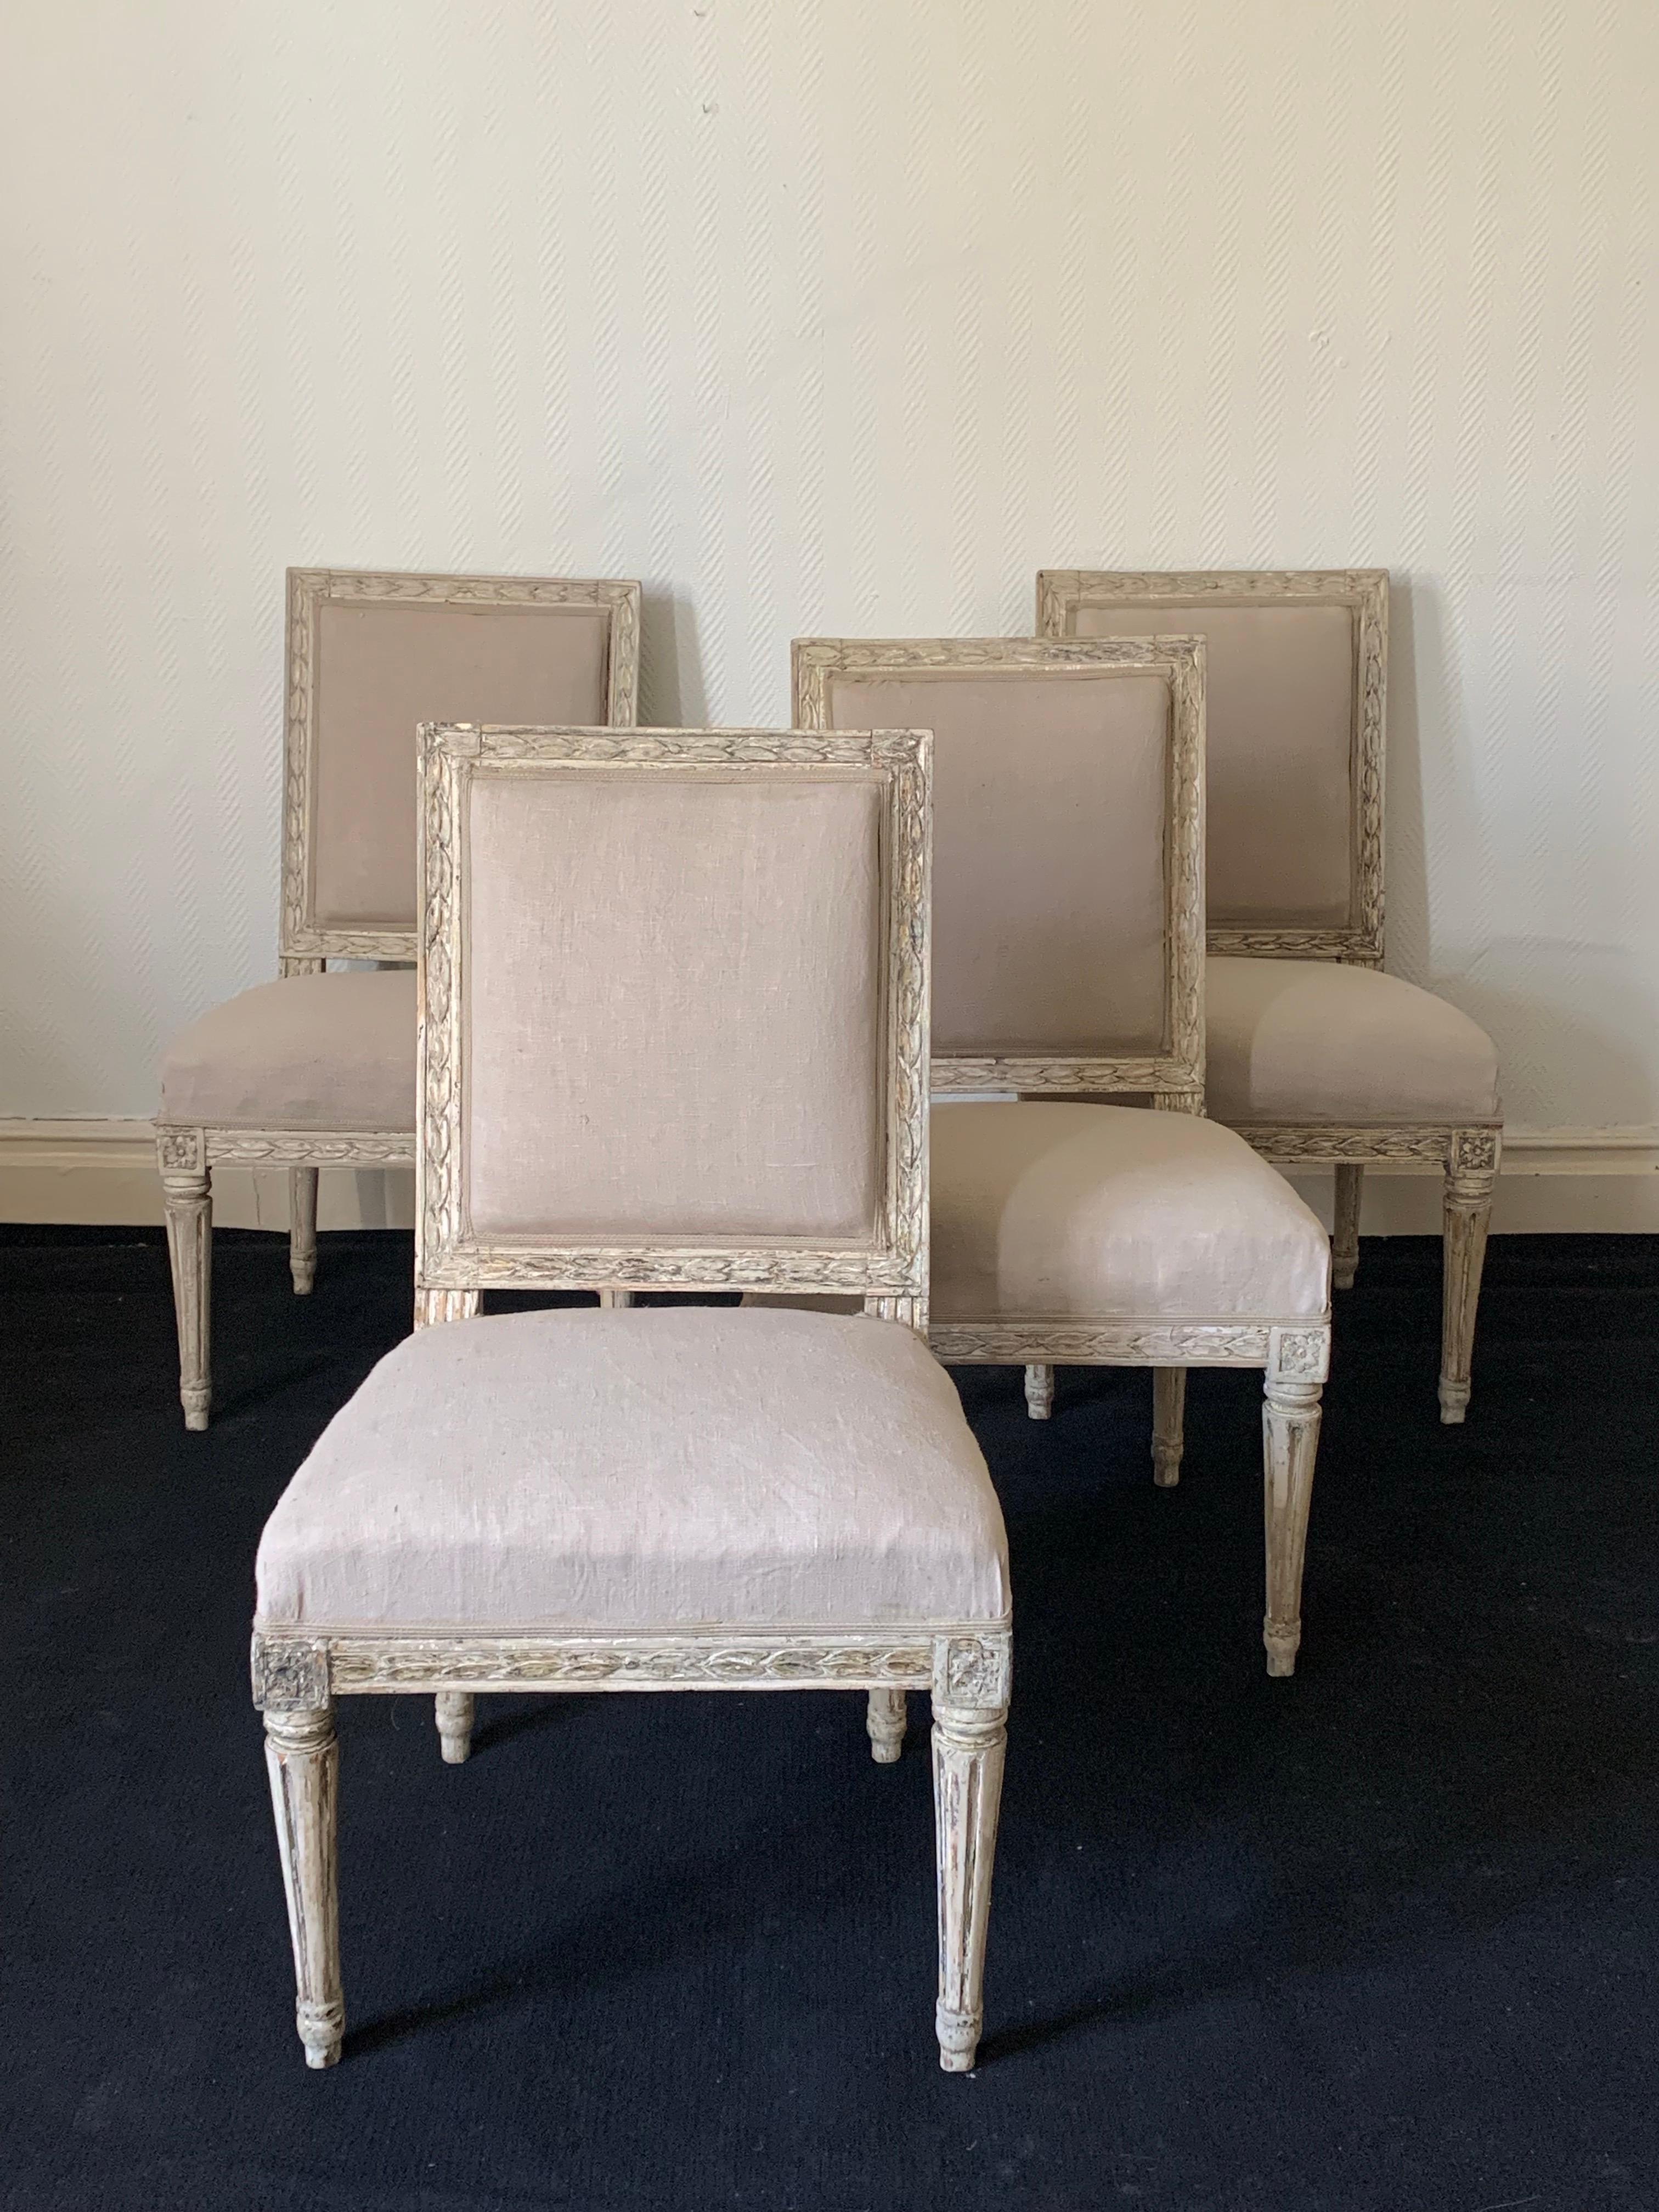 Four gustavian chairs made in Sweden about 1790. The chairs secondary color have been removed and what is left, is the original color.